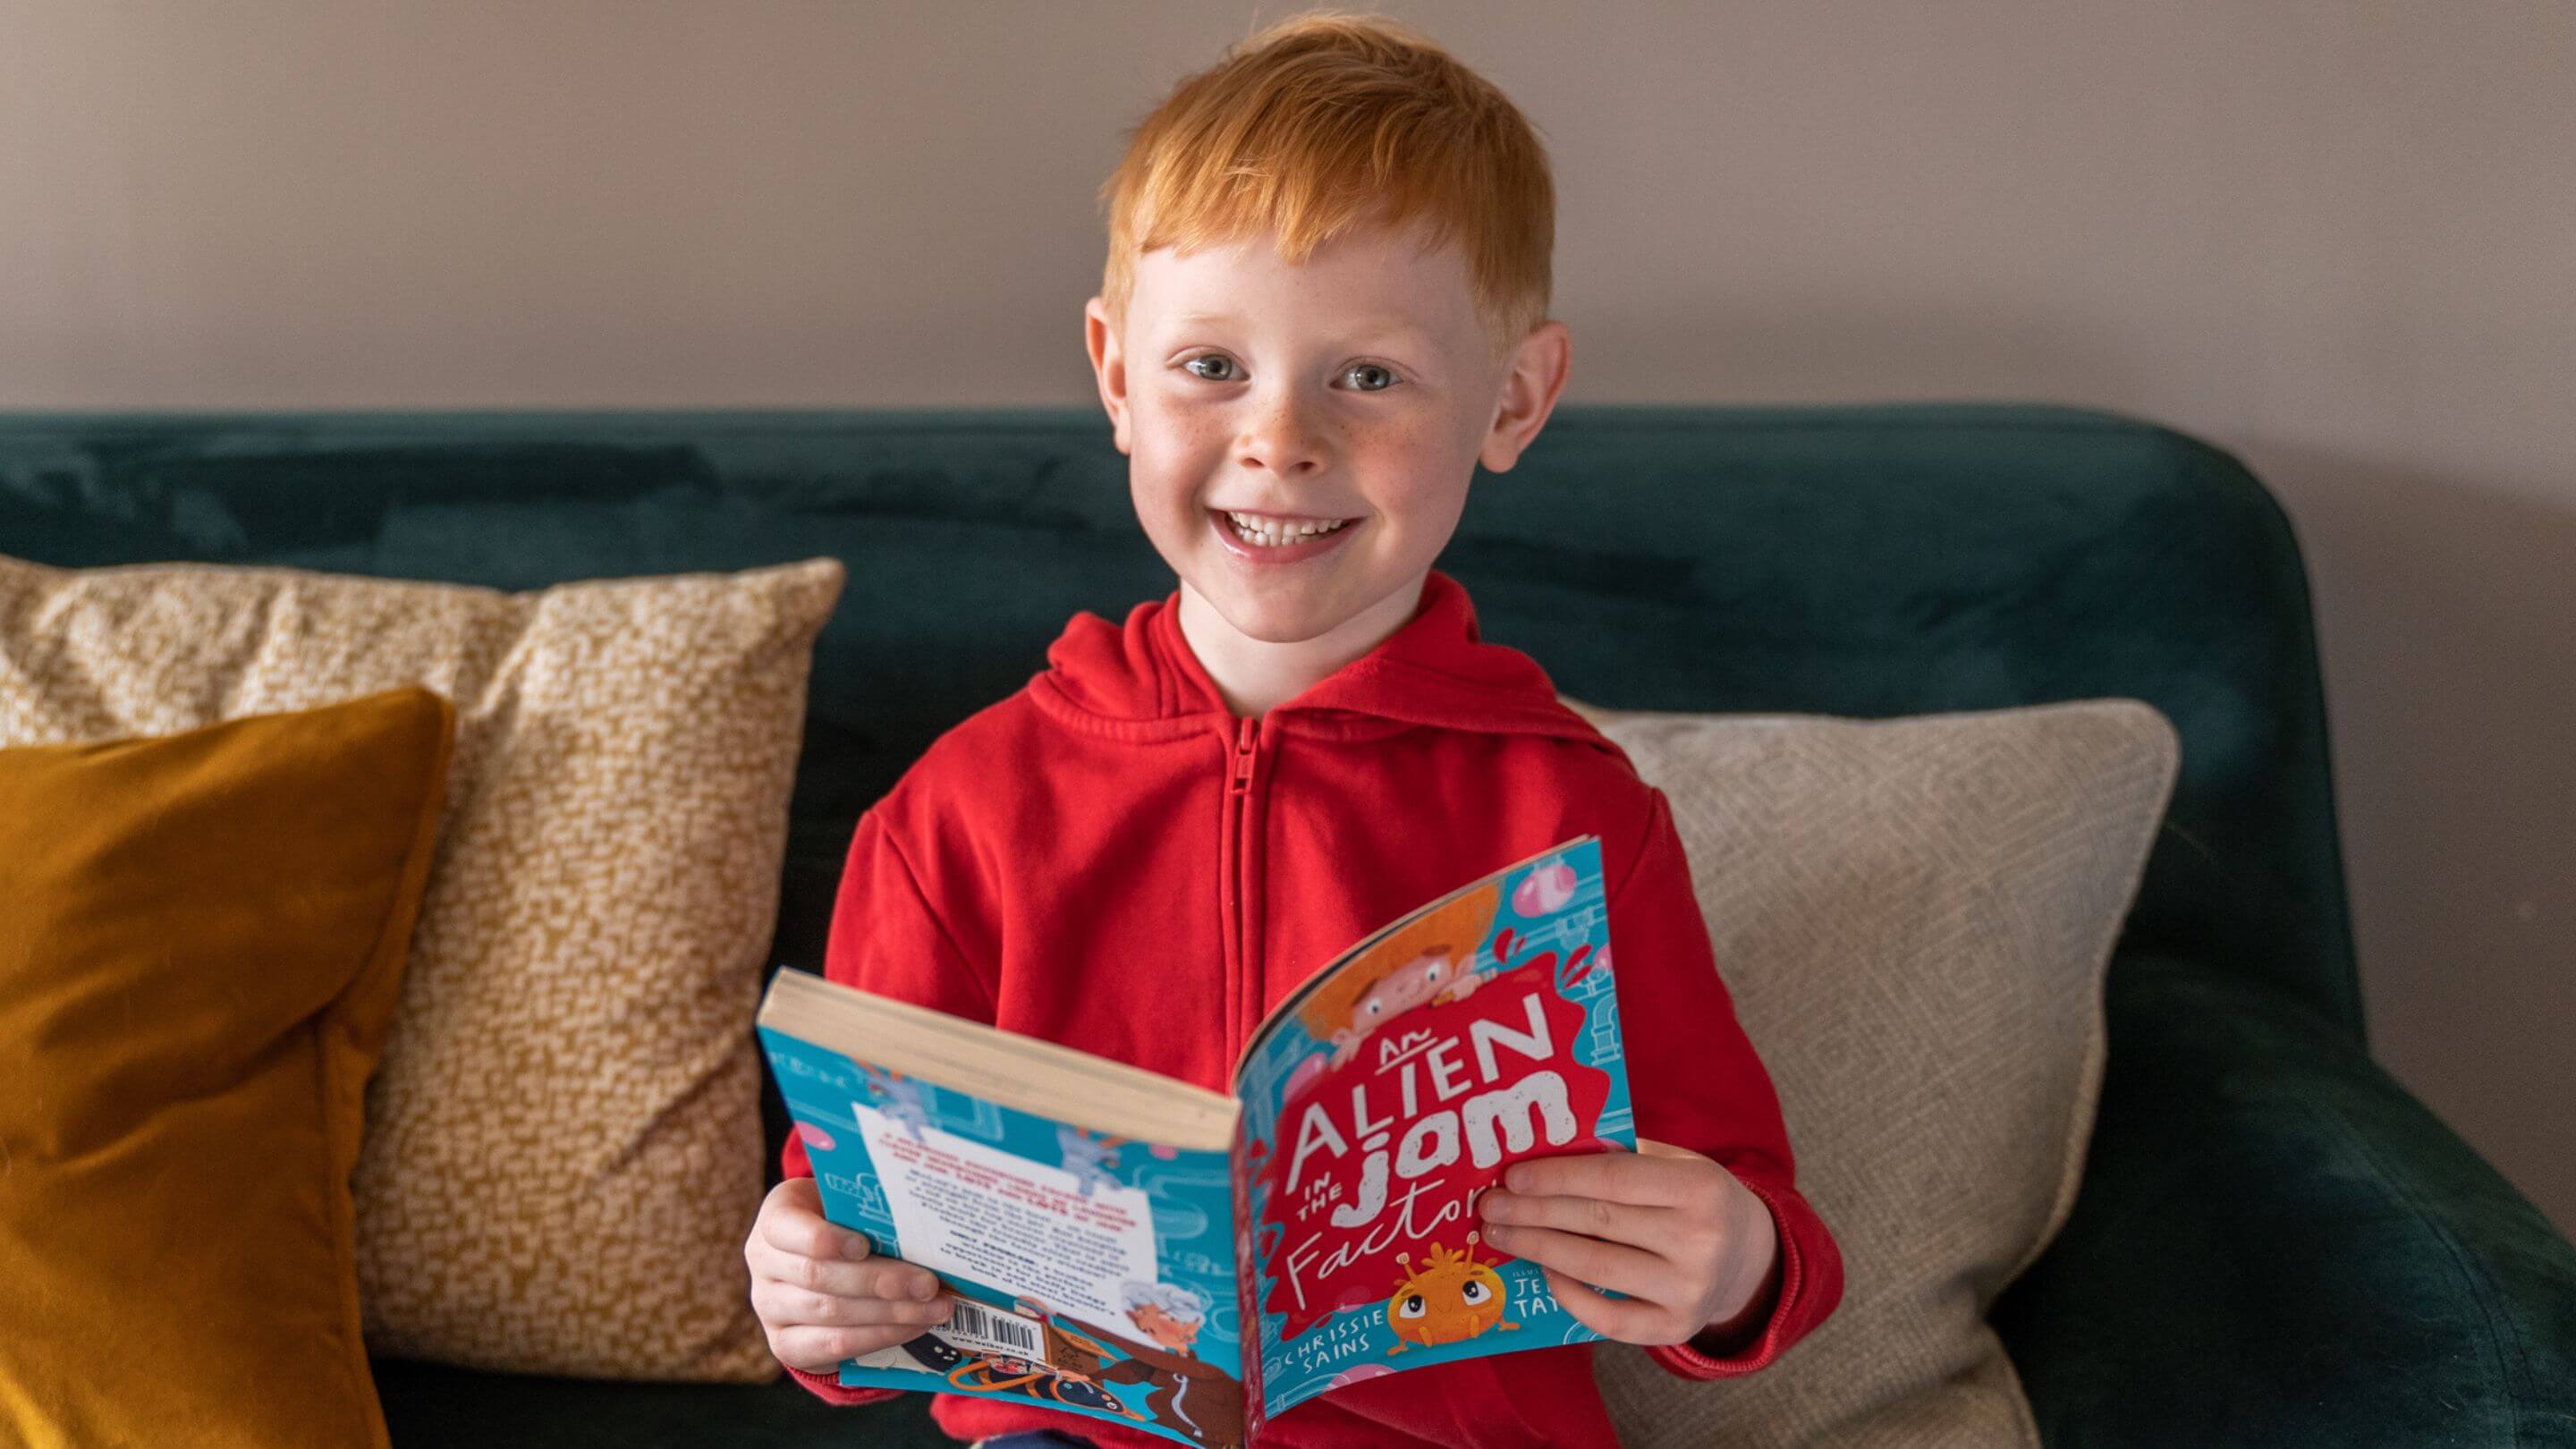 Smiling boy in a red top reading a chapter book from a Parrot Street subscription box